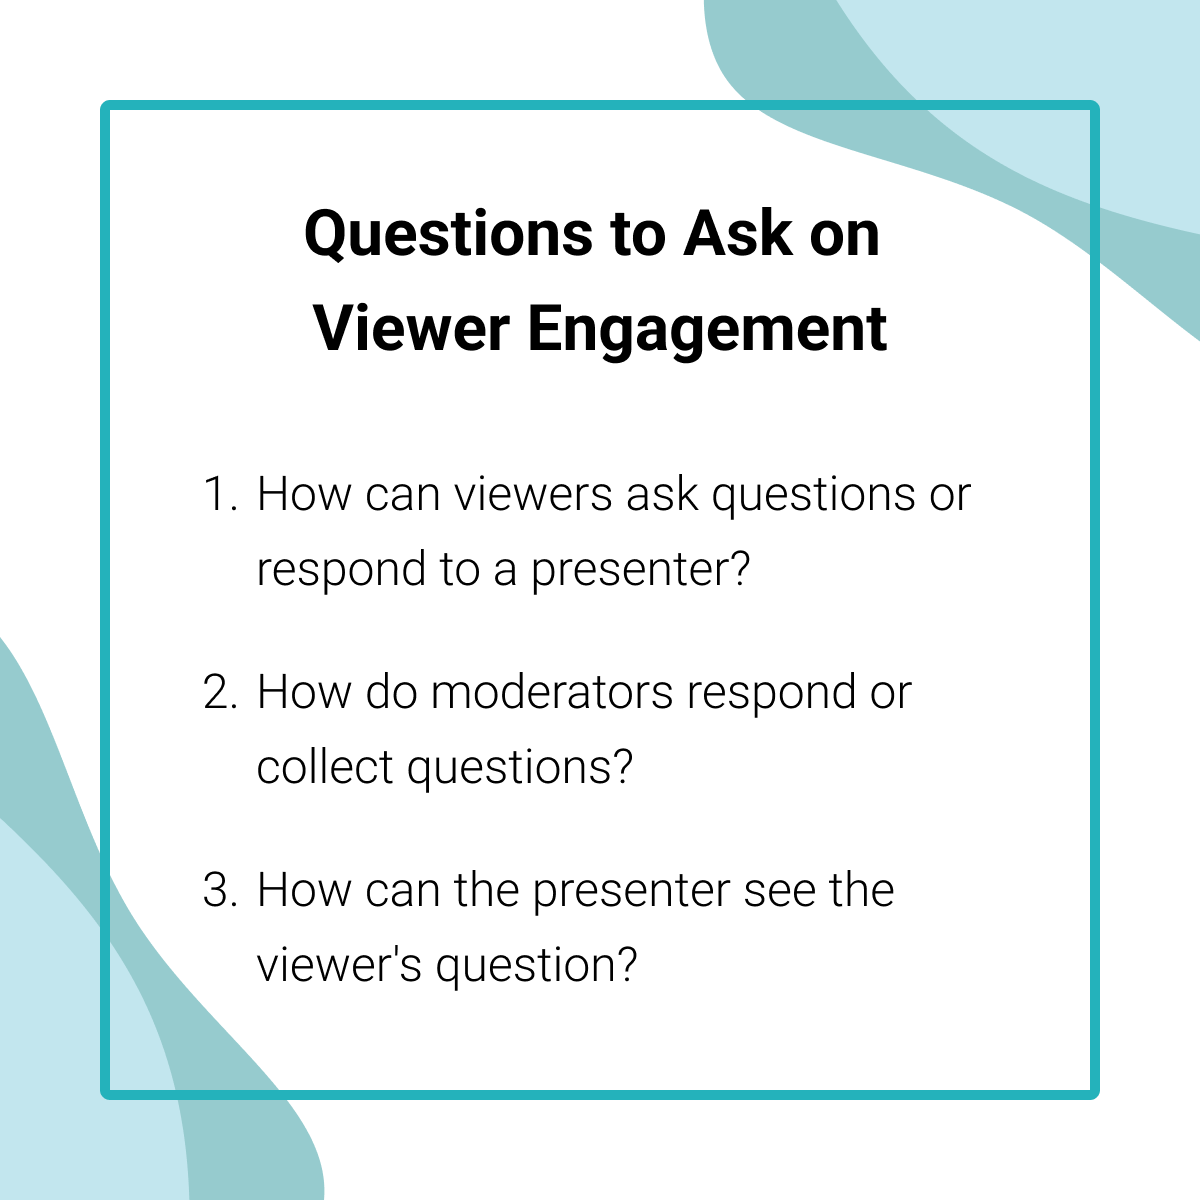 Questions to ask on viewer engagement